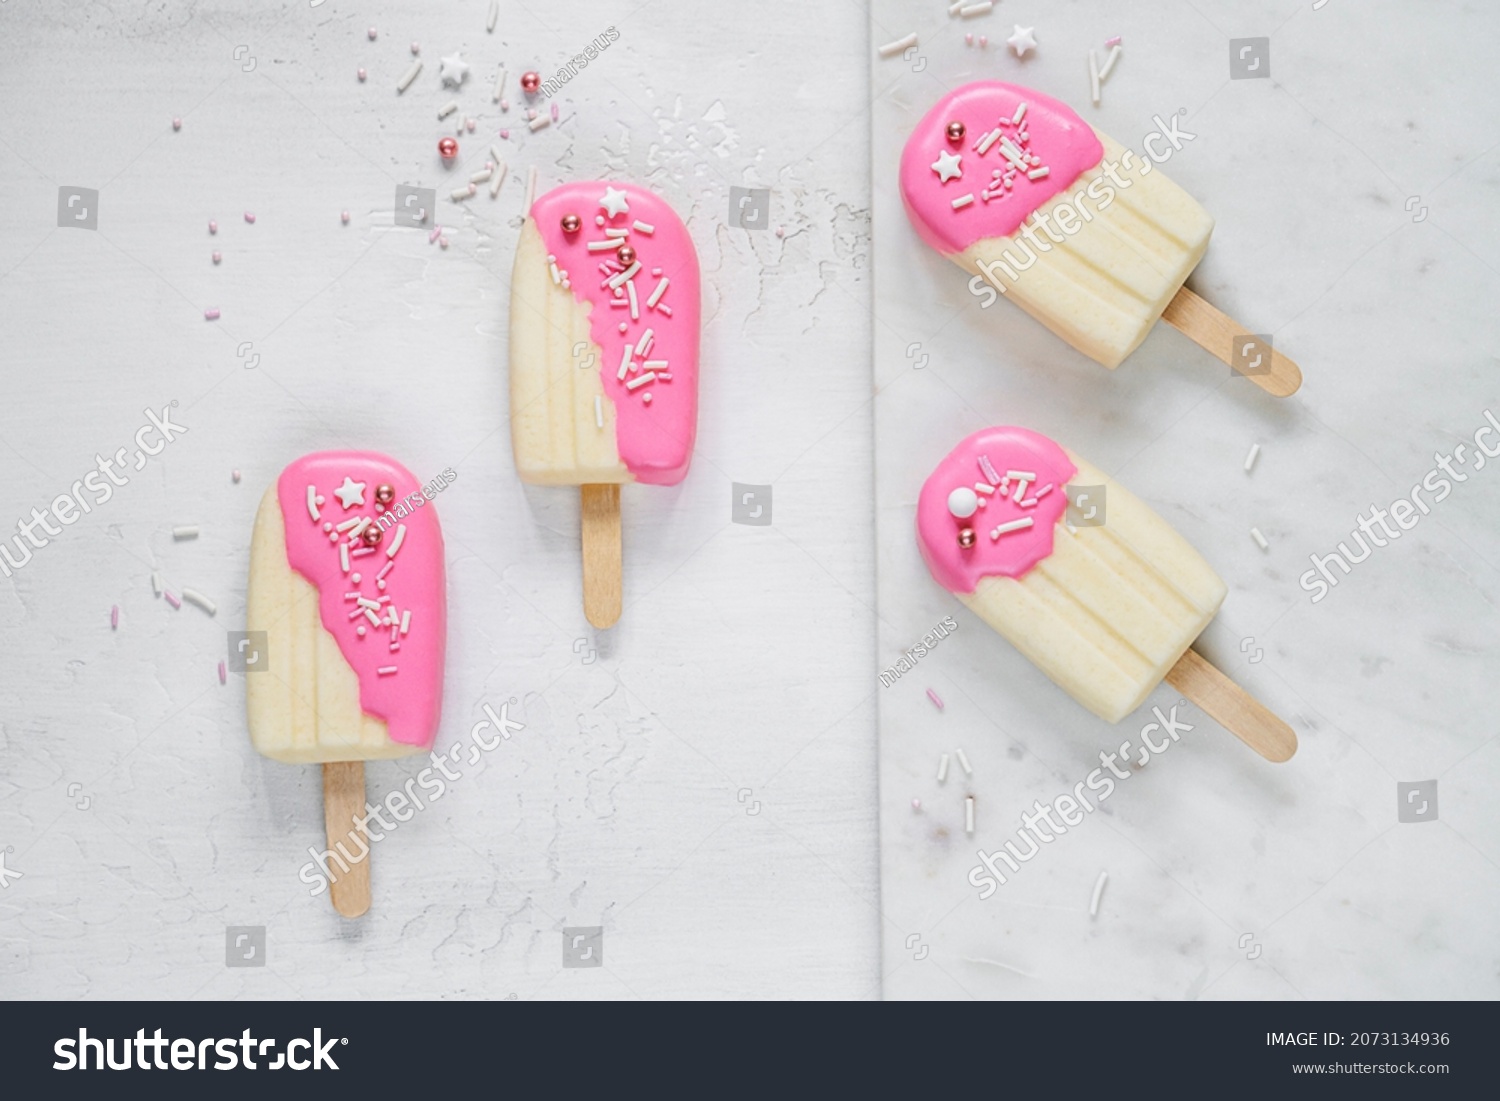 Top table view on four delicious vanilla ice cream bars with pink glaze surrounded by scattered sugar sprinkles on light background. Frozen dessert and summer snack concept #2073134936